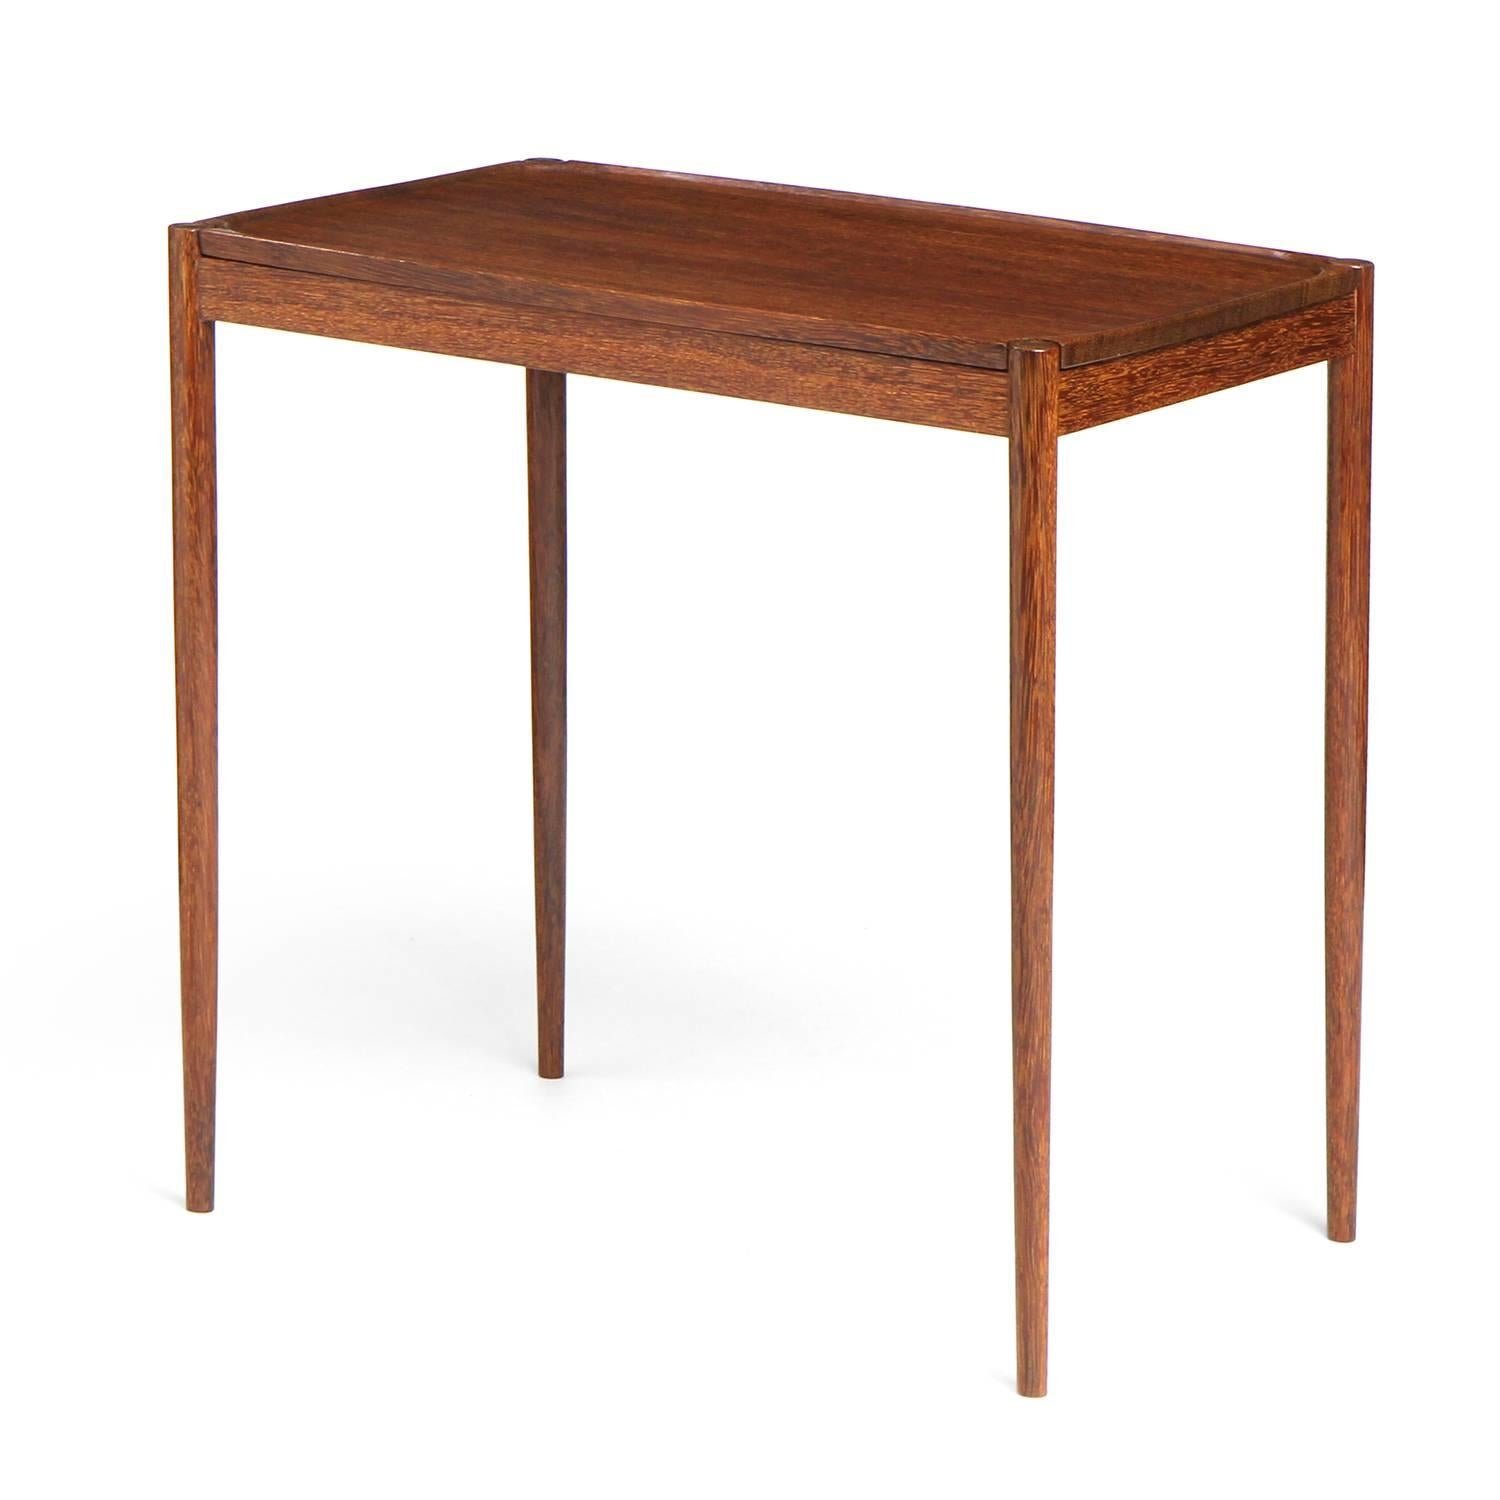 A spare and elegant tropical hardwood occasional table having a rectangular top and slightly tapered dowel form legs.